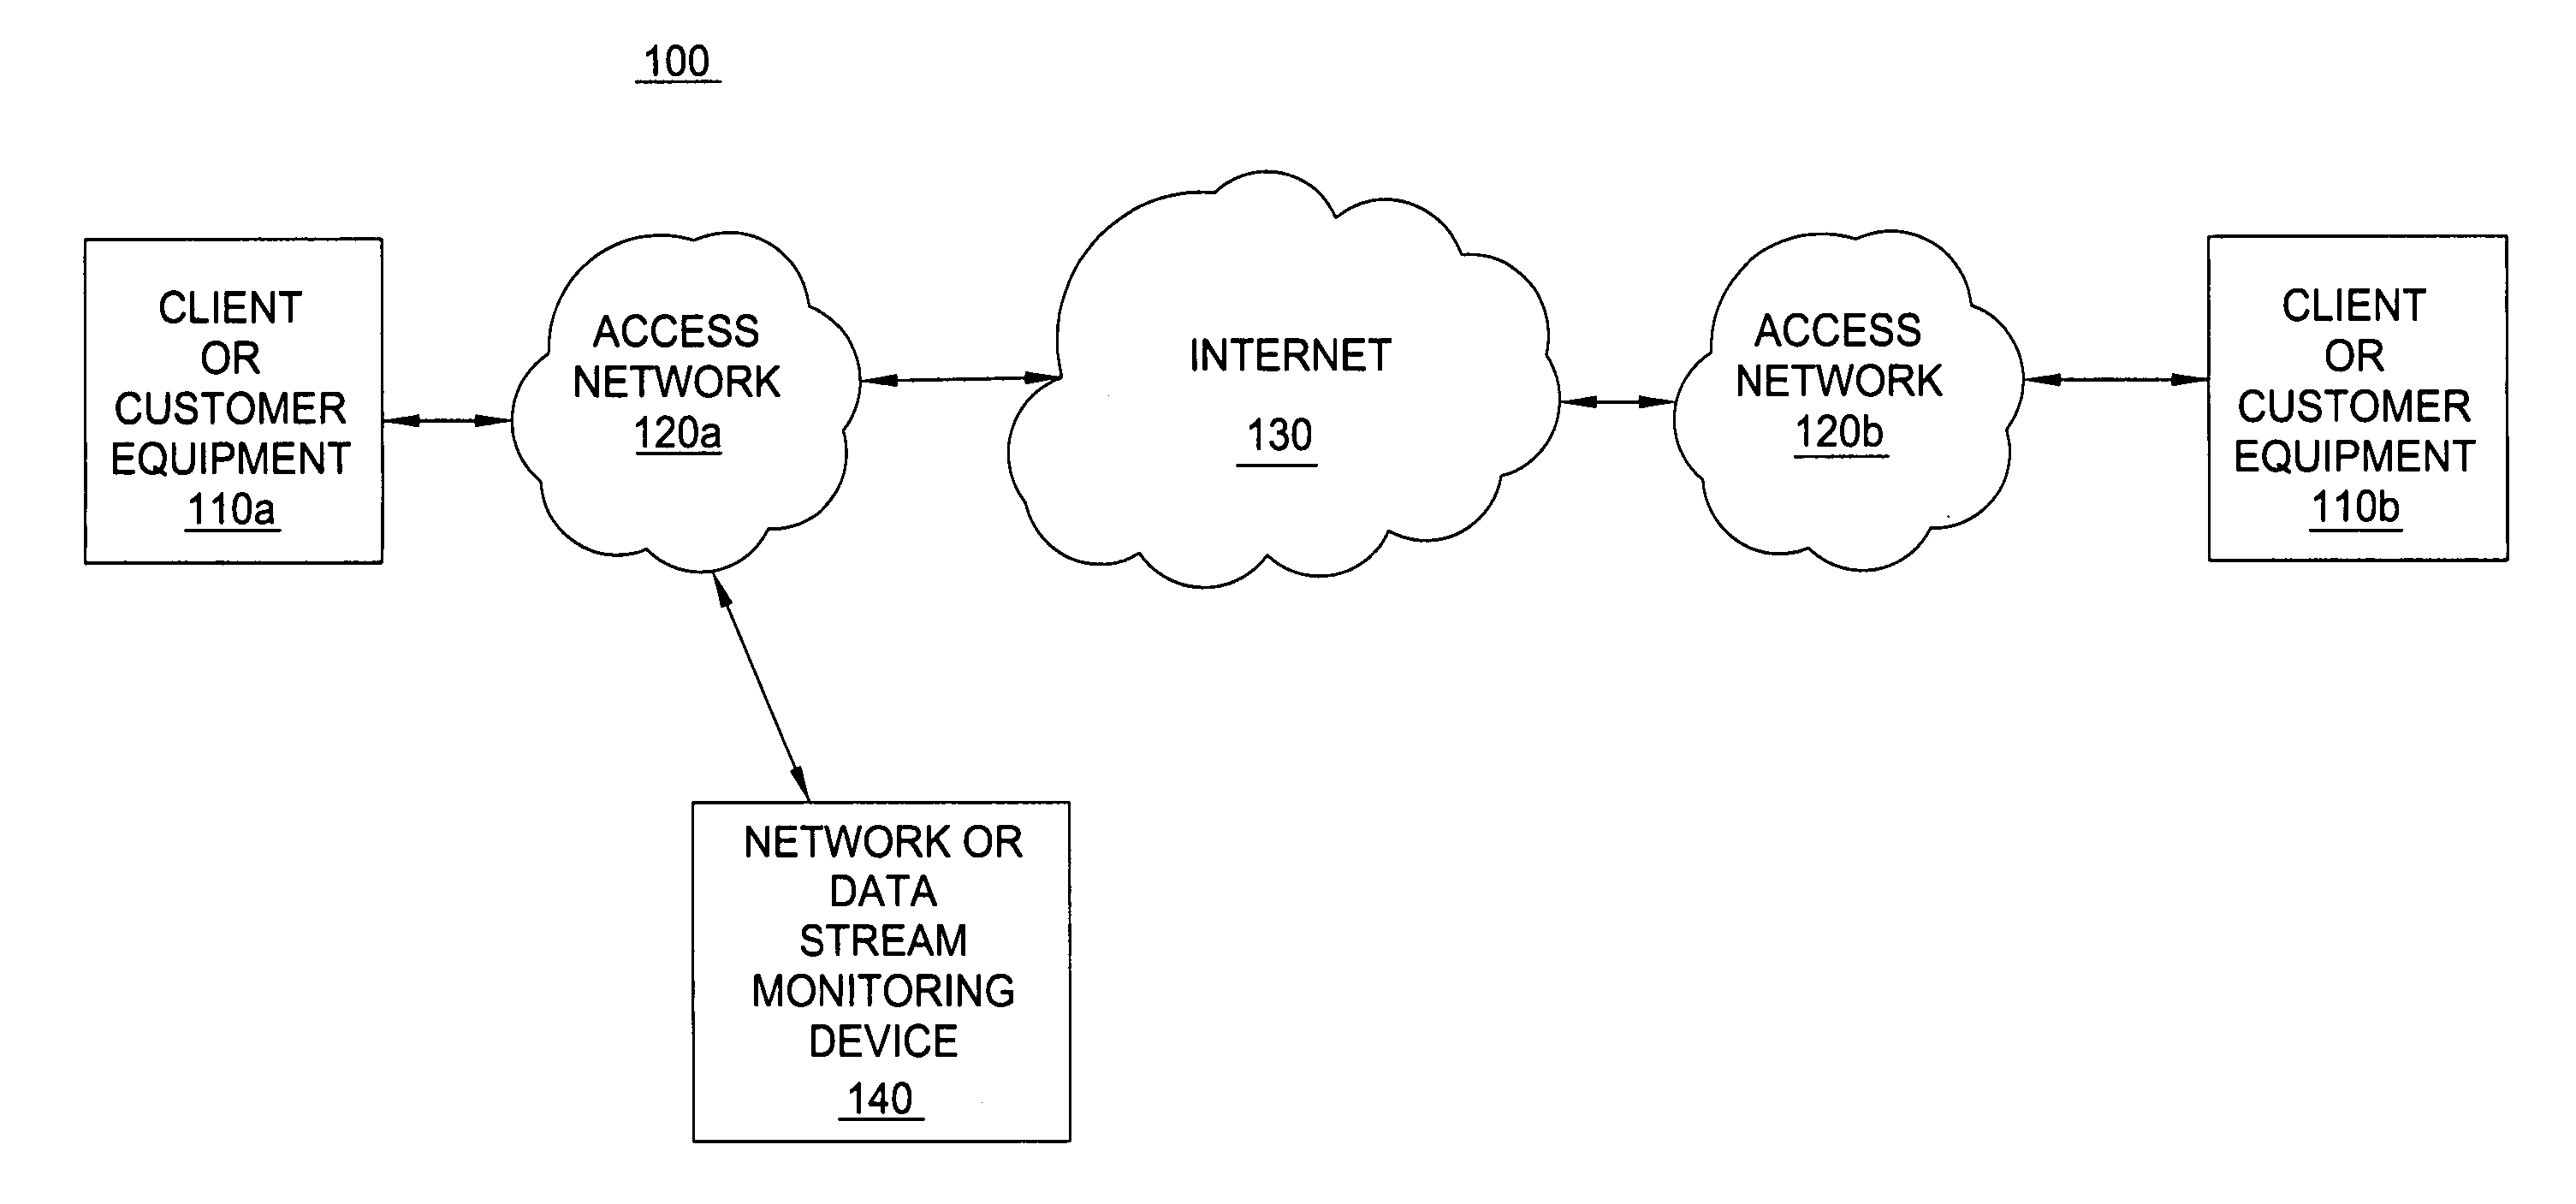 Method and apparatus for finding biased quantiles in data streams